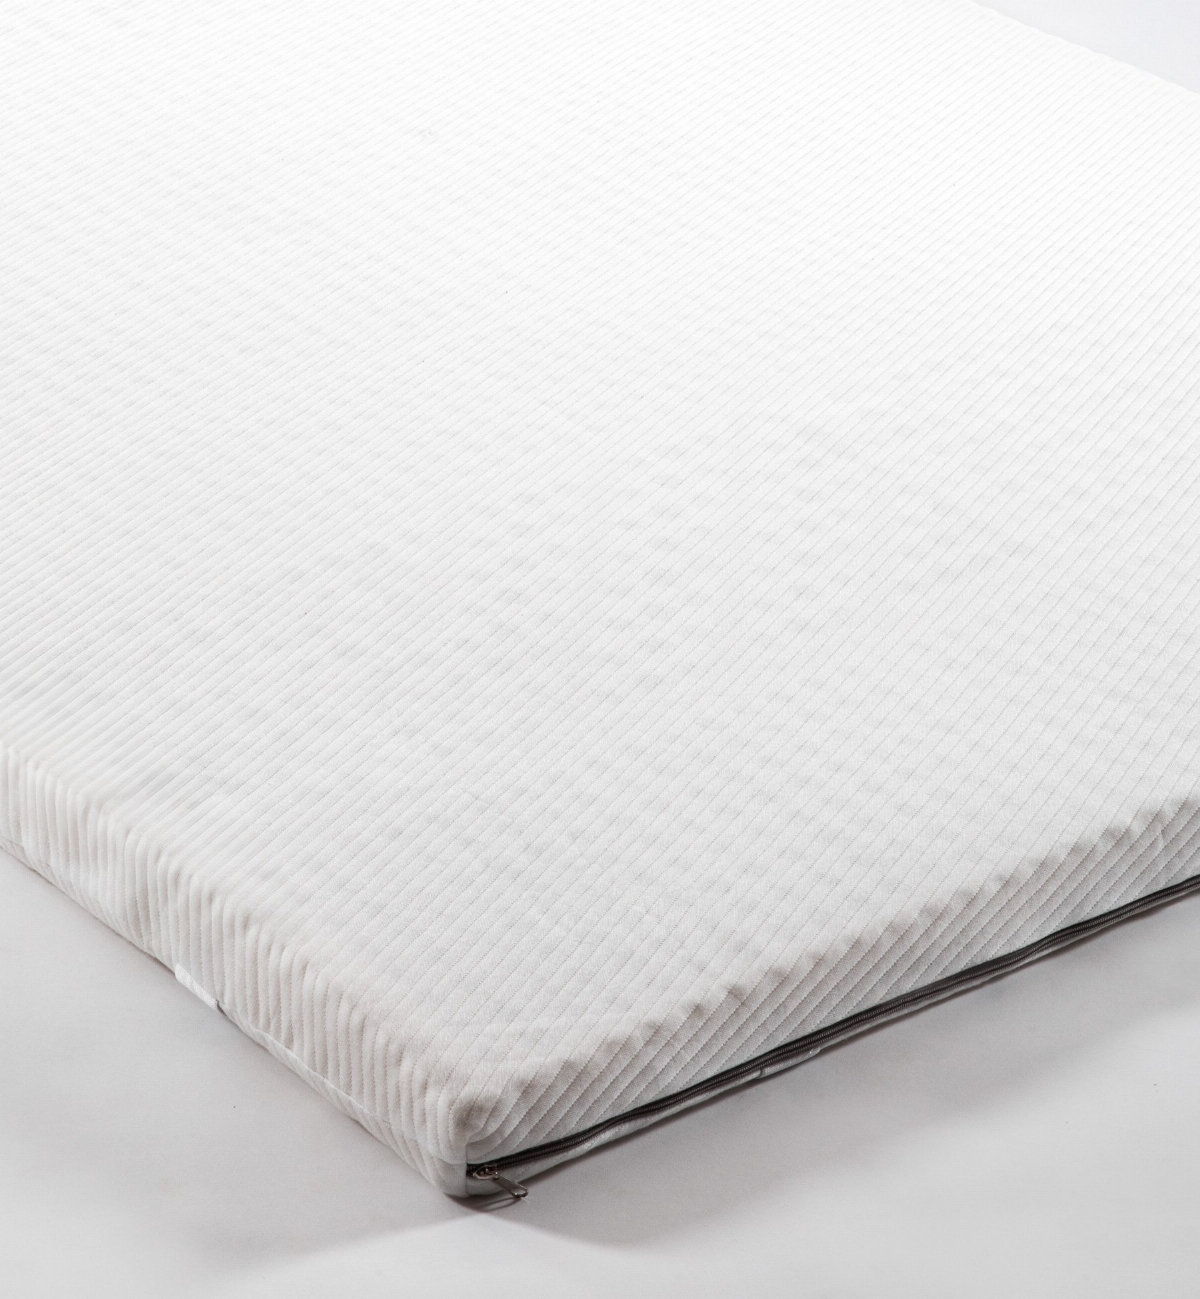 Natural latex mattress topper for double beds, the ideal solution for boosting the comfort of your mattress